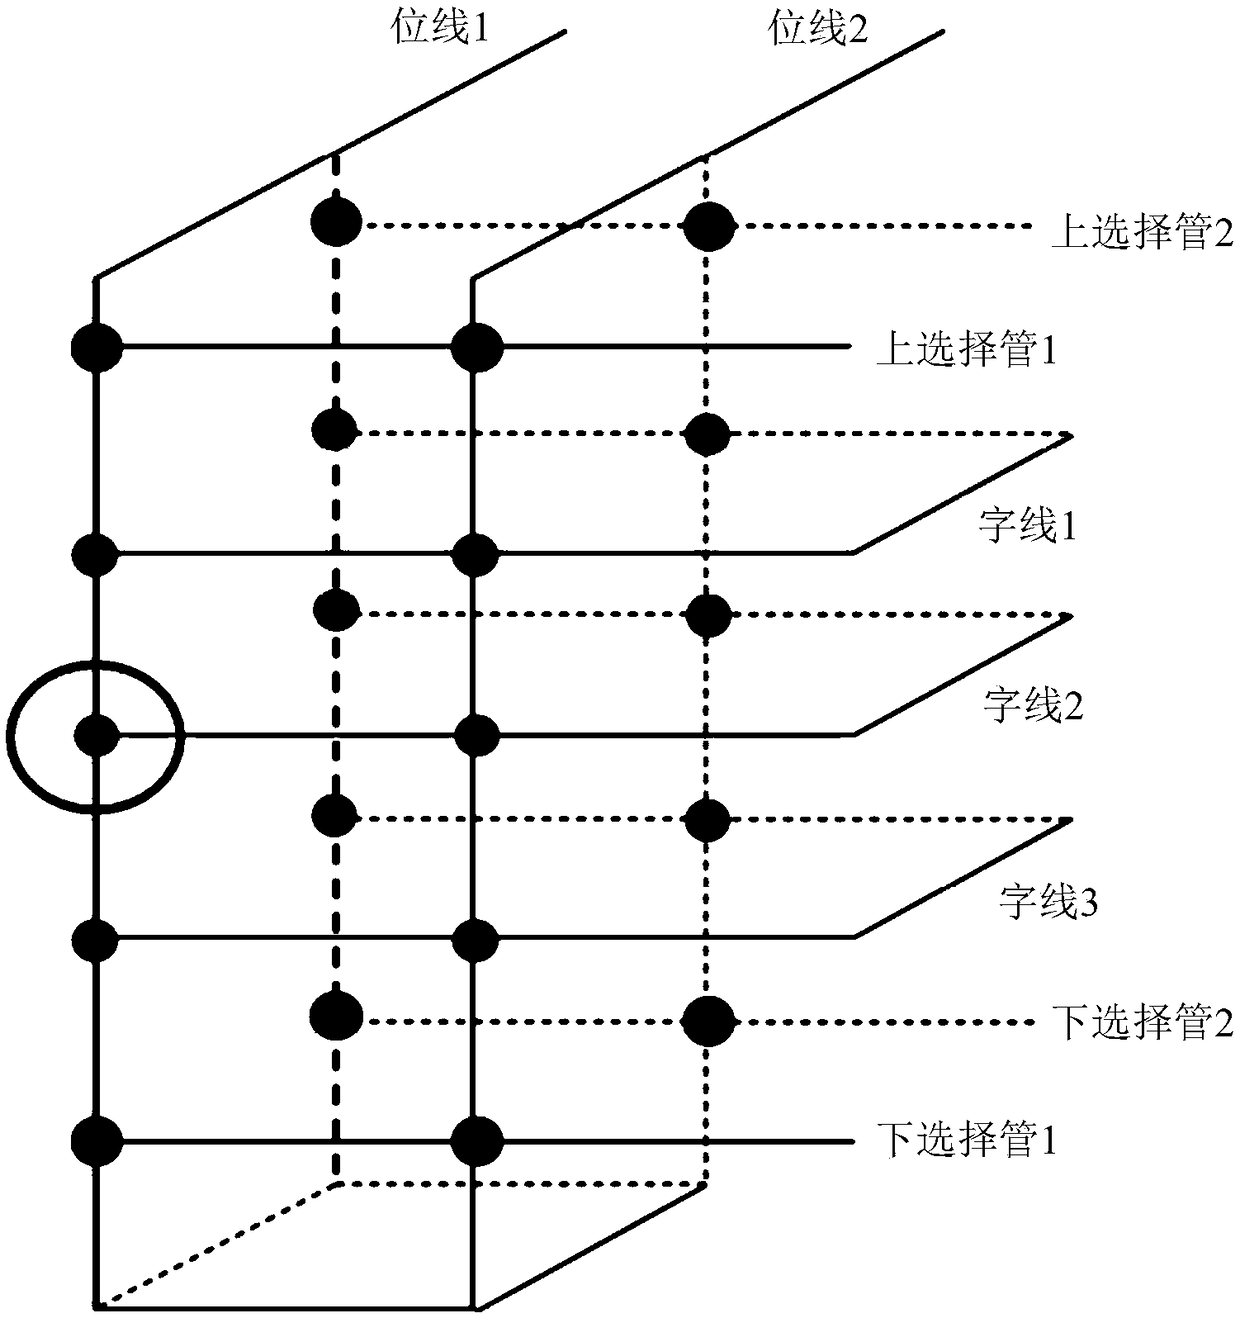 Reading method of 3D NAND flash memory